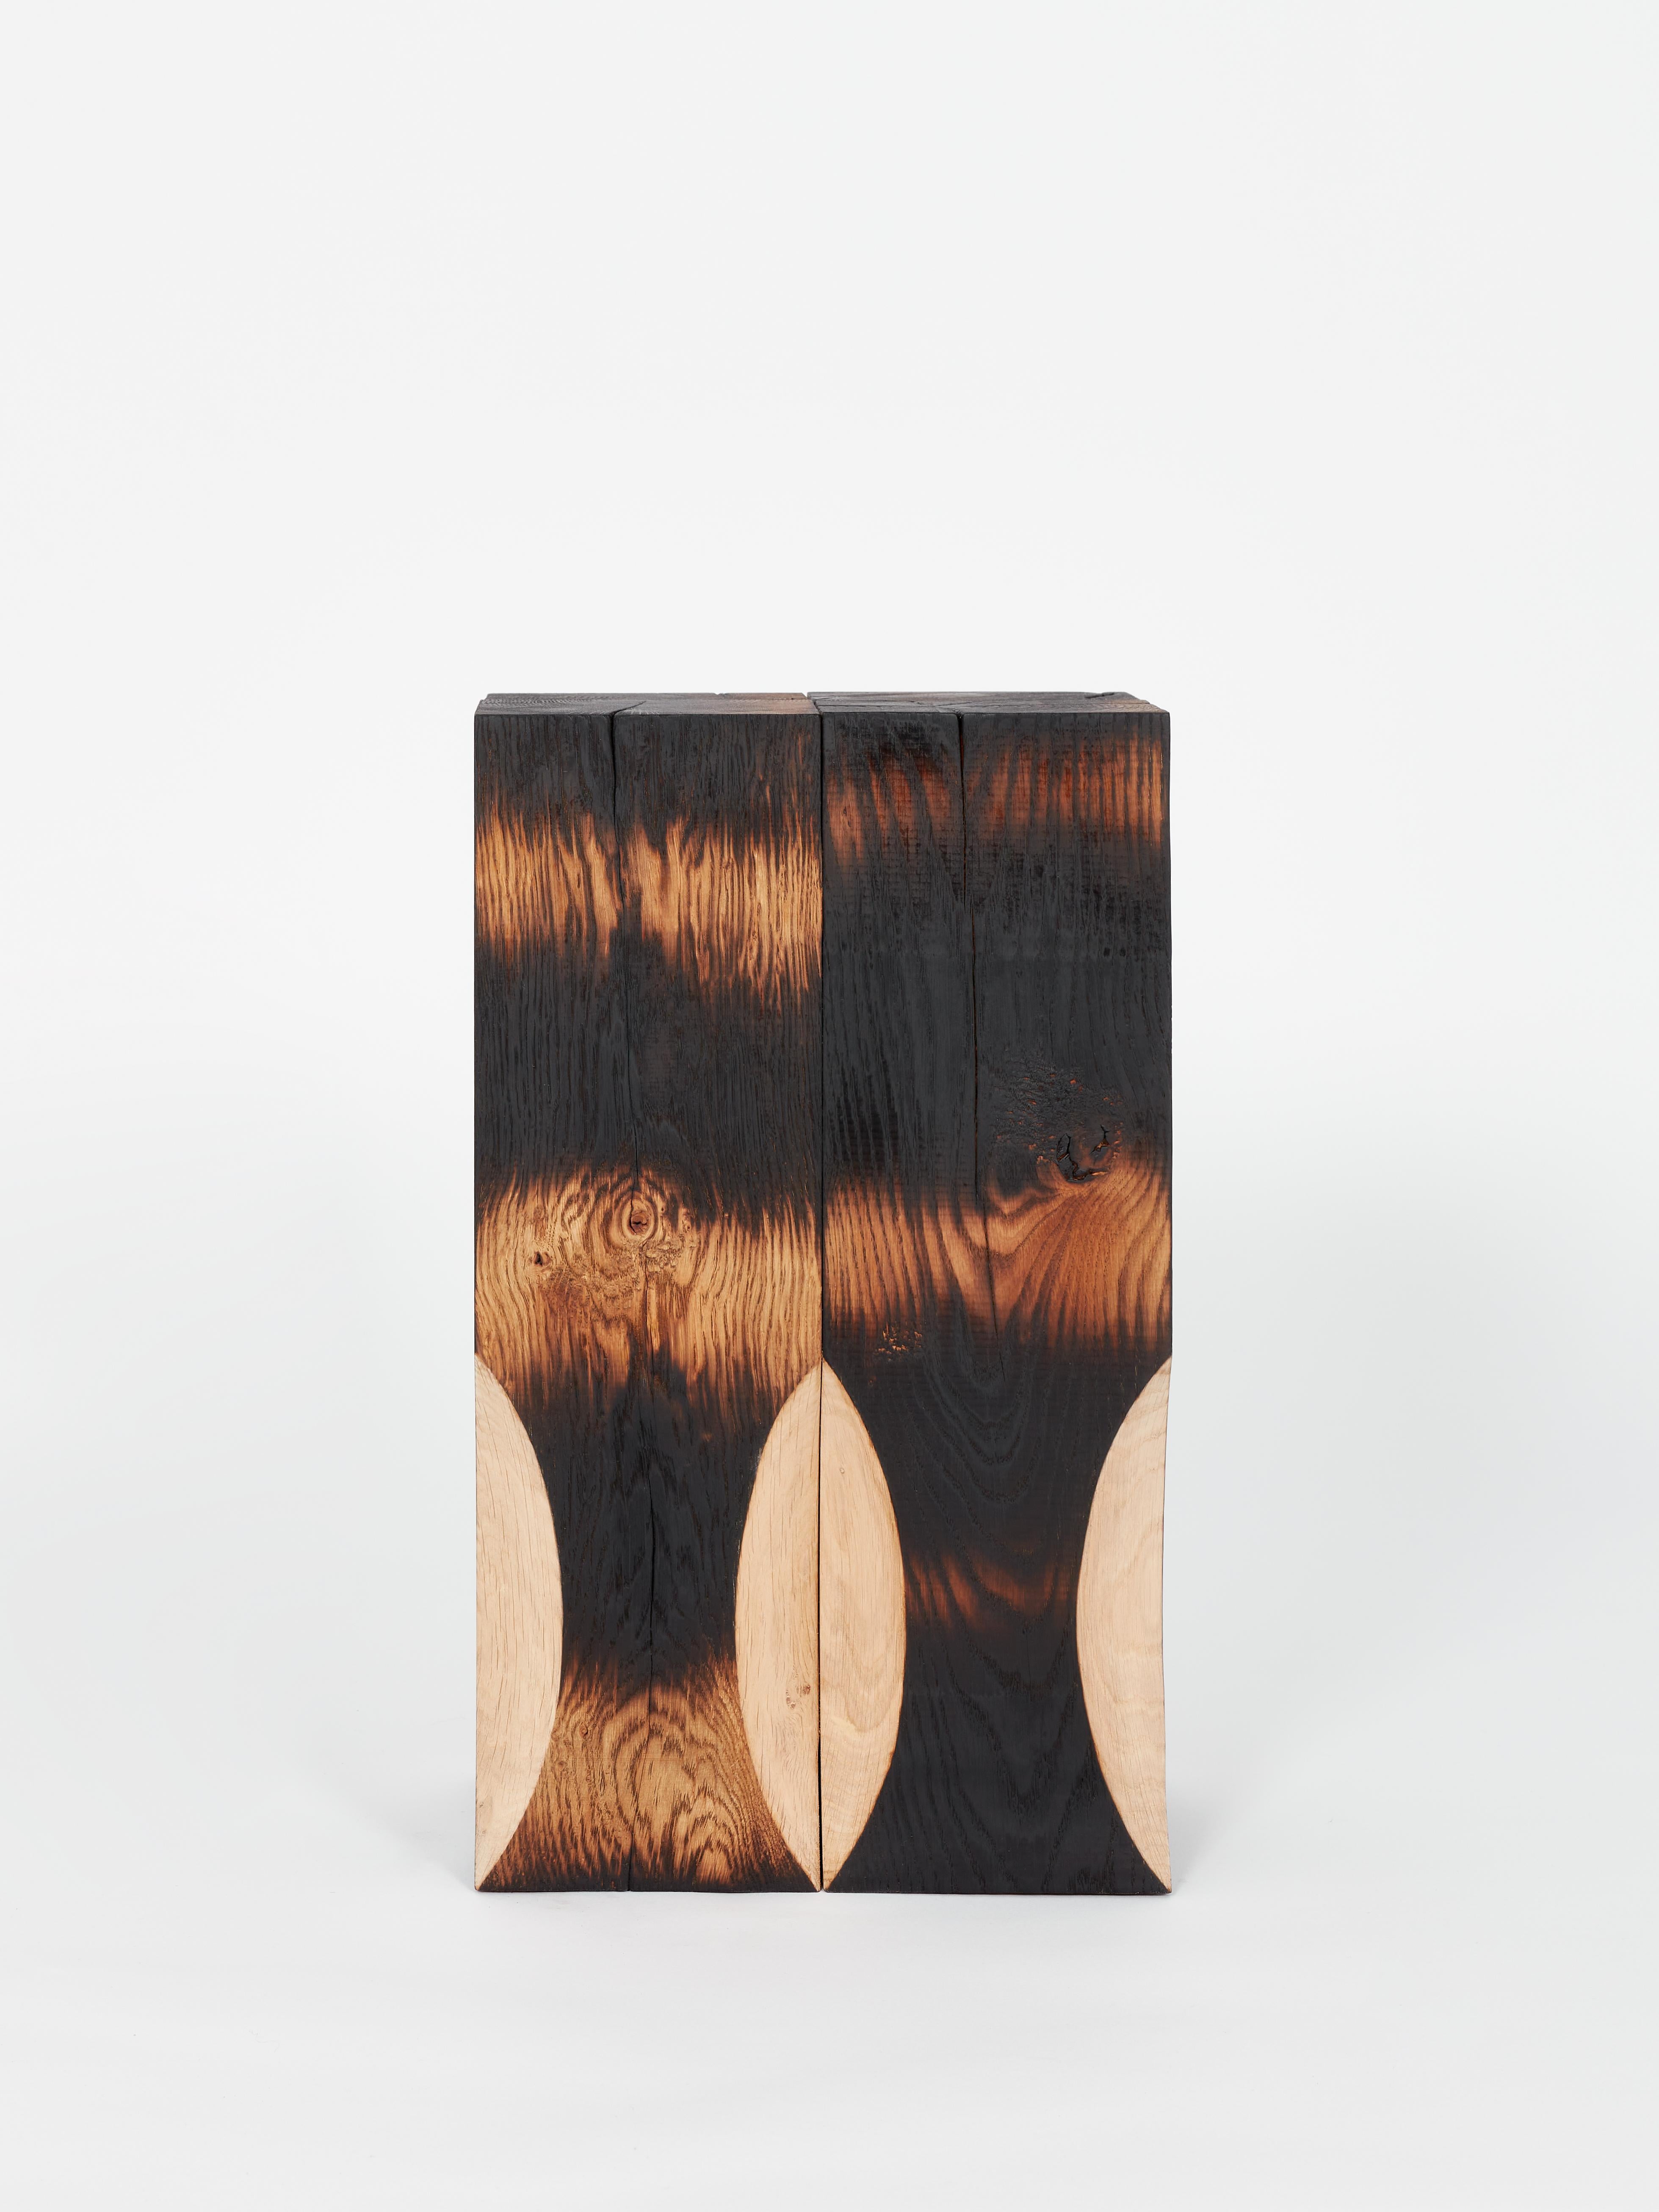 Hand-Crafted Contemporary burned Go Shun stool by Yoon Shun For Sale